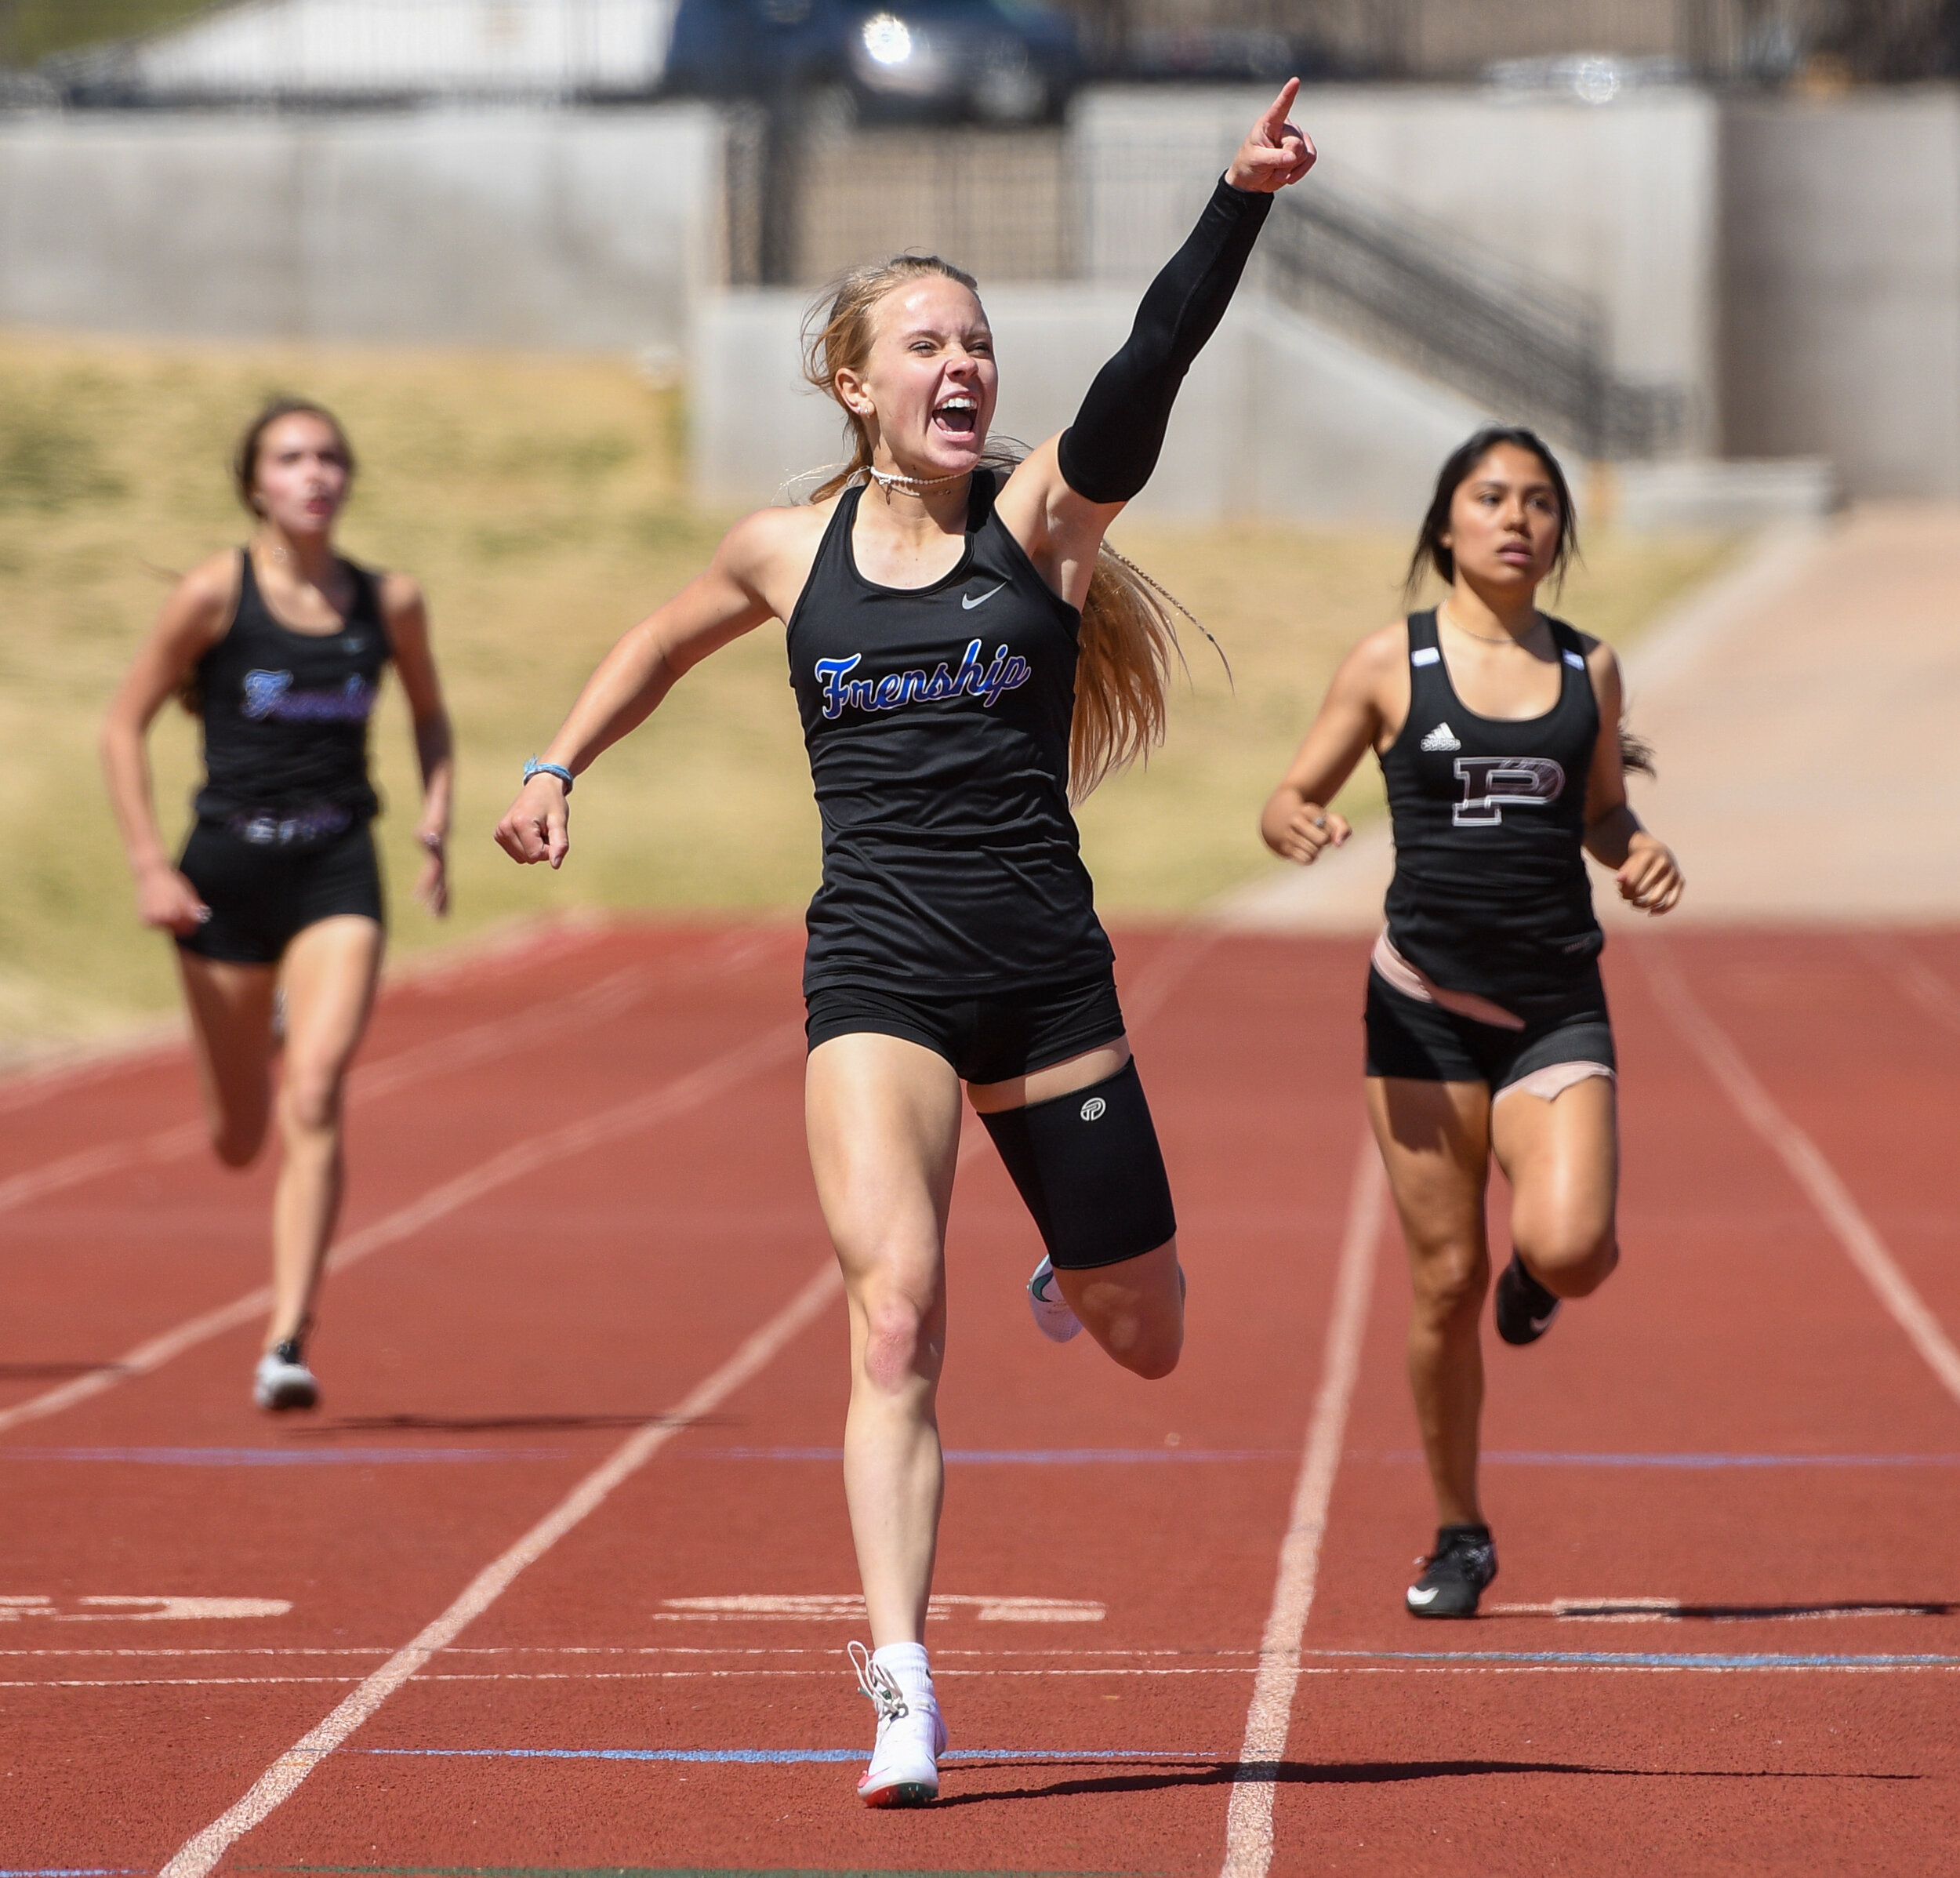  Frenship’s Jillian Cowart comes in first place on the 400-meter dash during the Lubbock Invitational track meet on Saturday, March 27, 2021, at Lowrey Field in Lubbock, Texas.  